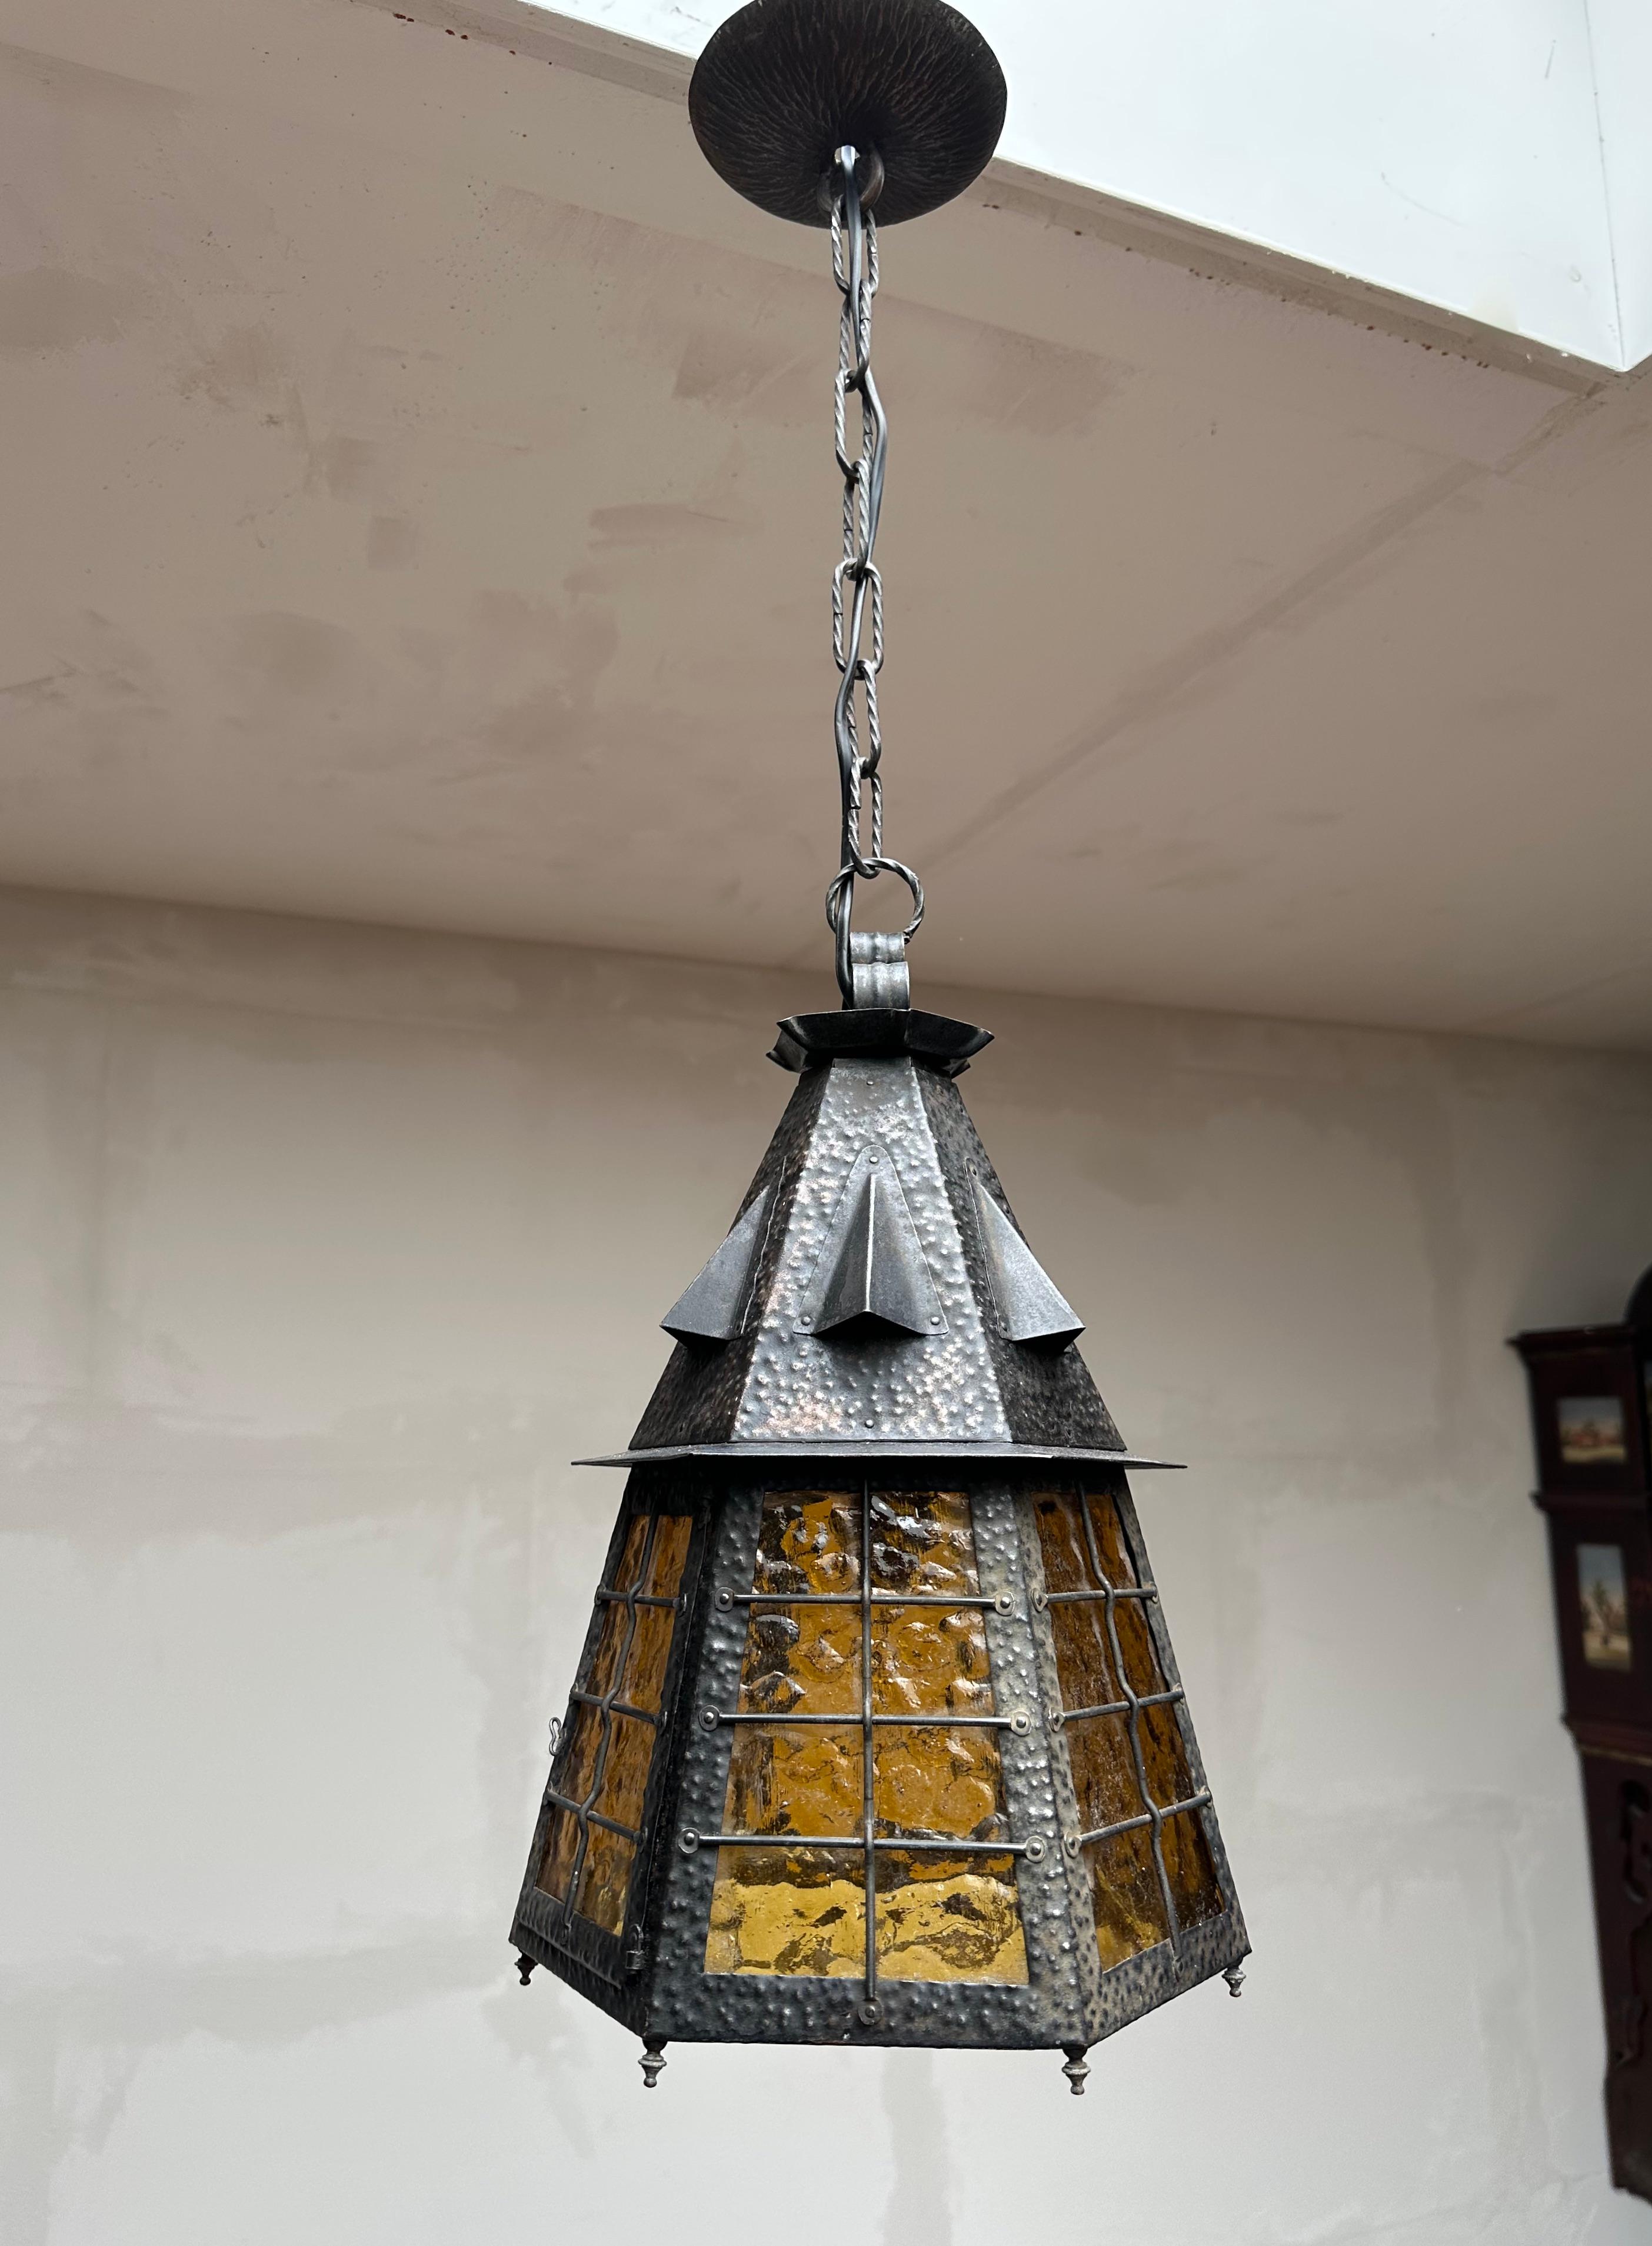 Rare and finely handcrafted, antique hallway lantern.

This beautifully executed light fixture from the earliest years of the 1900s will look particularly well in the entry hall of an Arts & Crafts (inspired) interior. All handcrafted out of natural